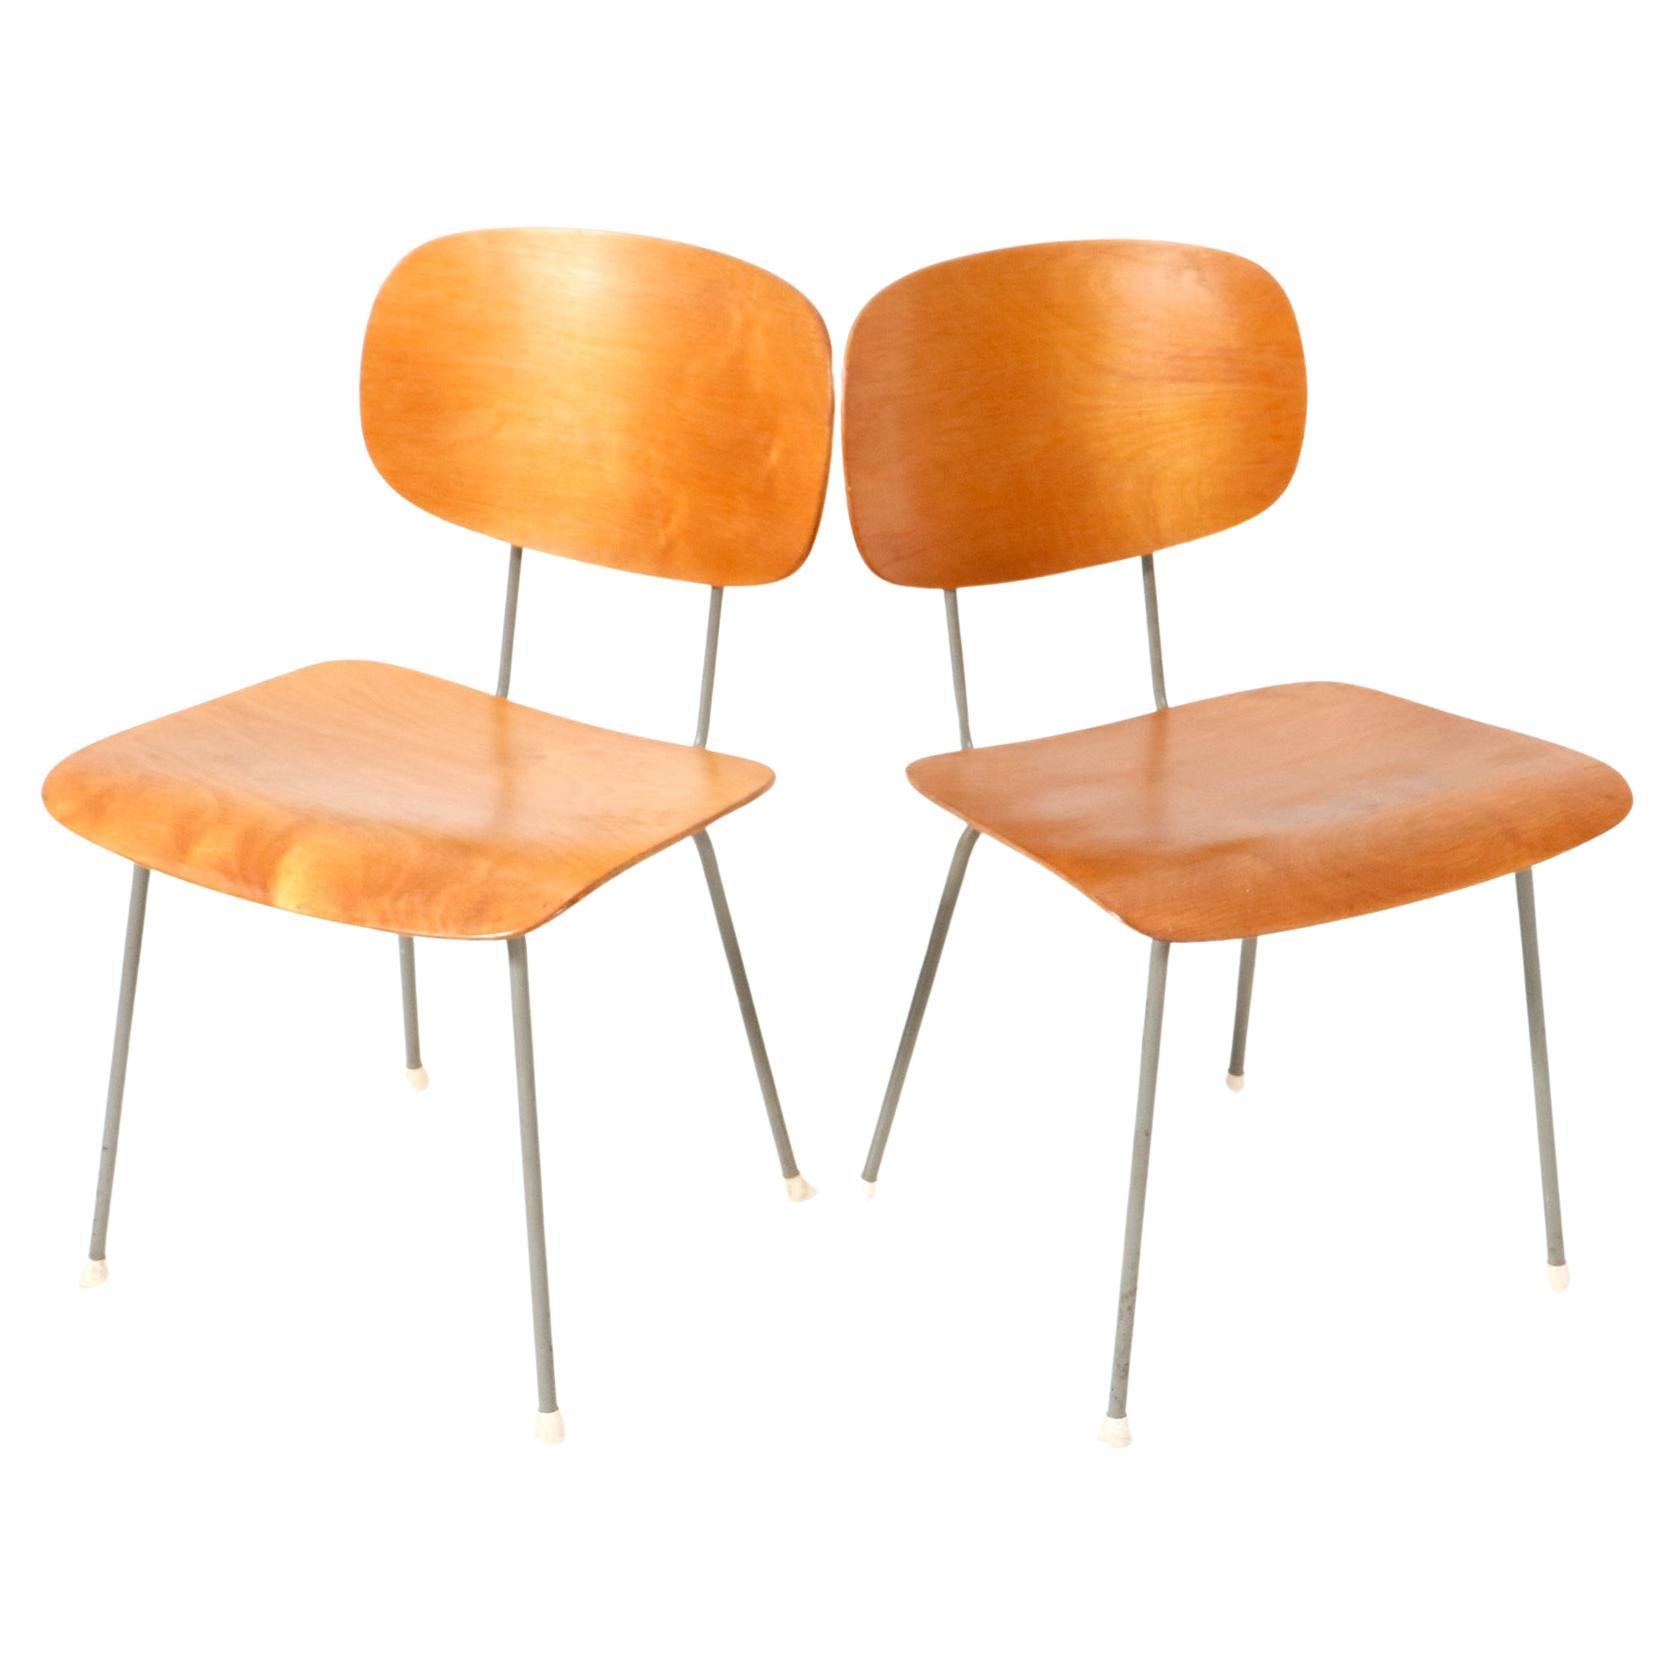 Pair of Mid-Century Modern Model 116 Side Chairs by Wim Rietveld for Gispen For Sale